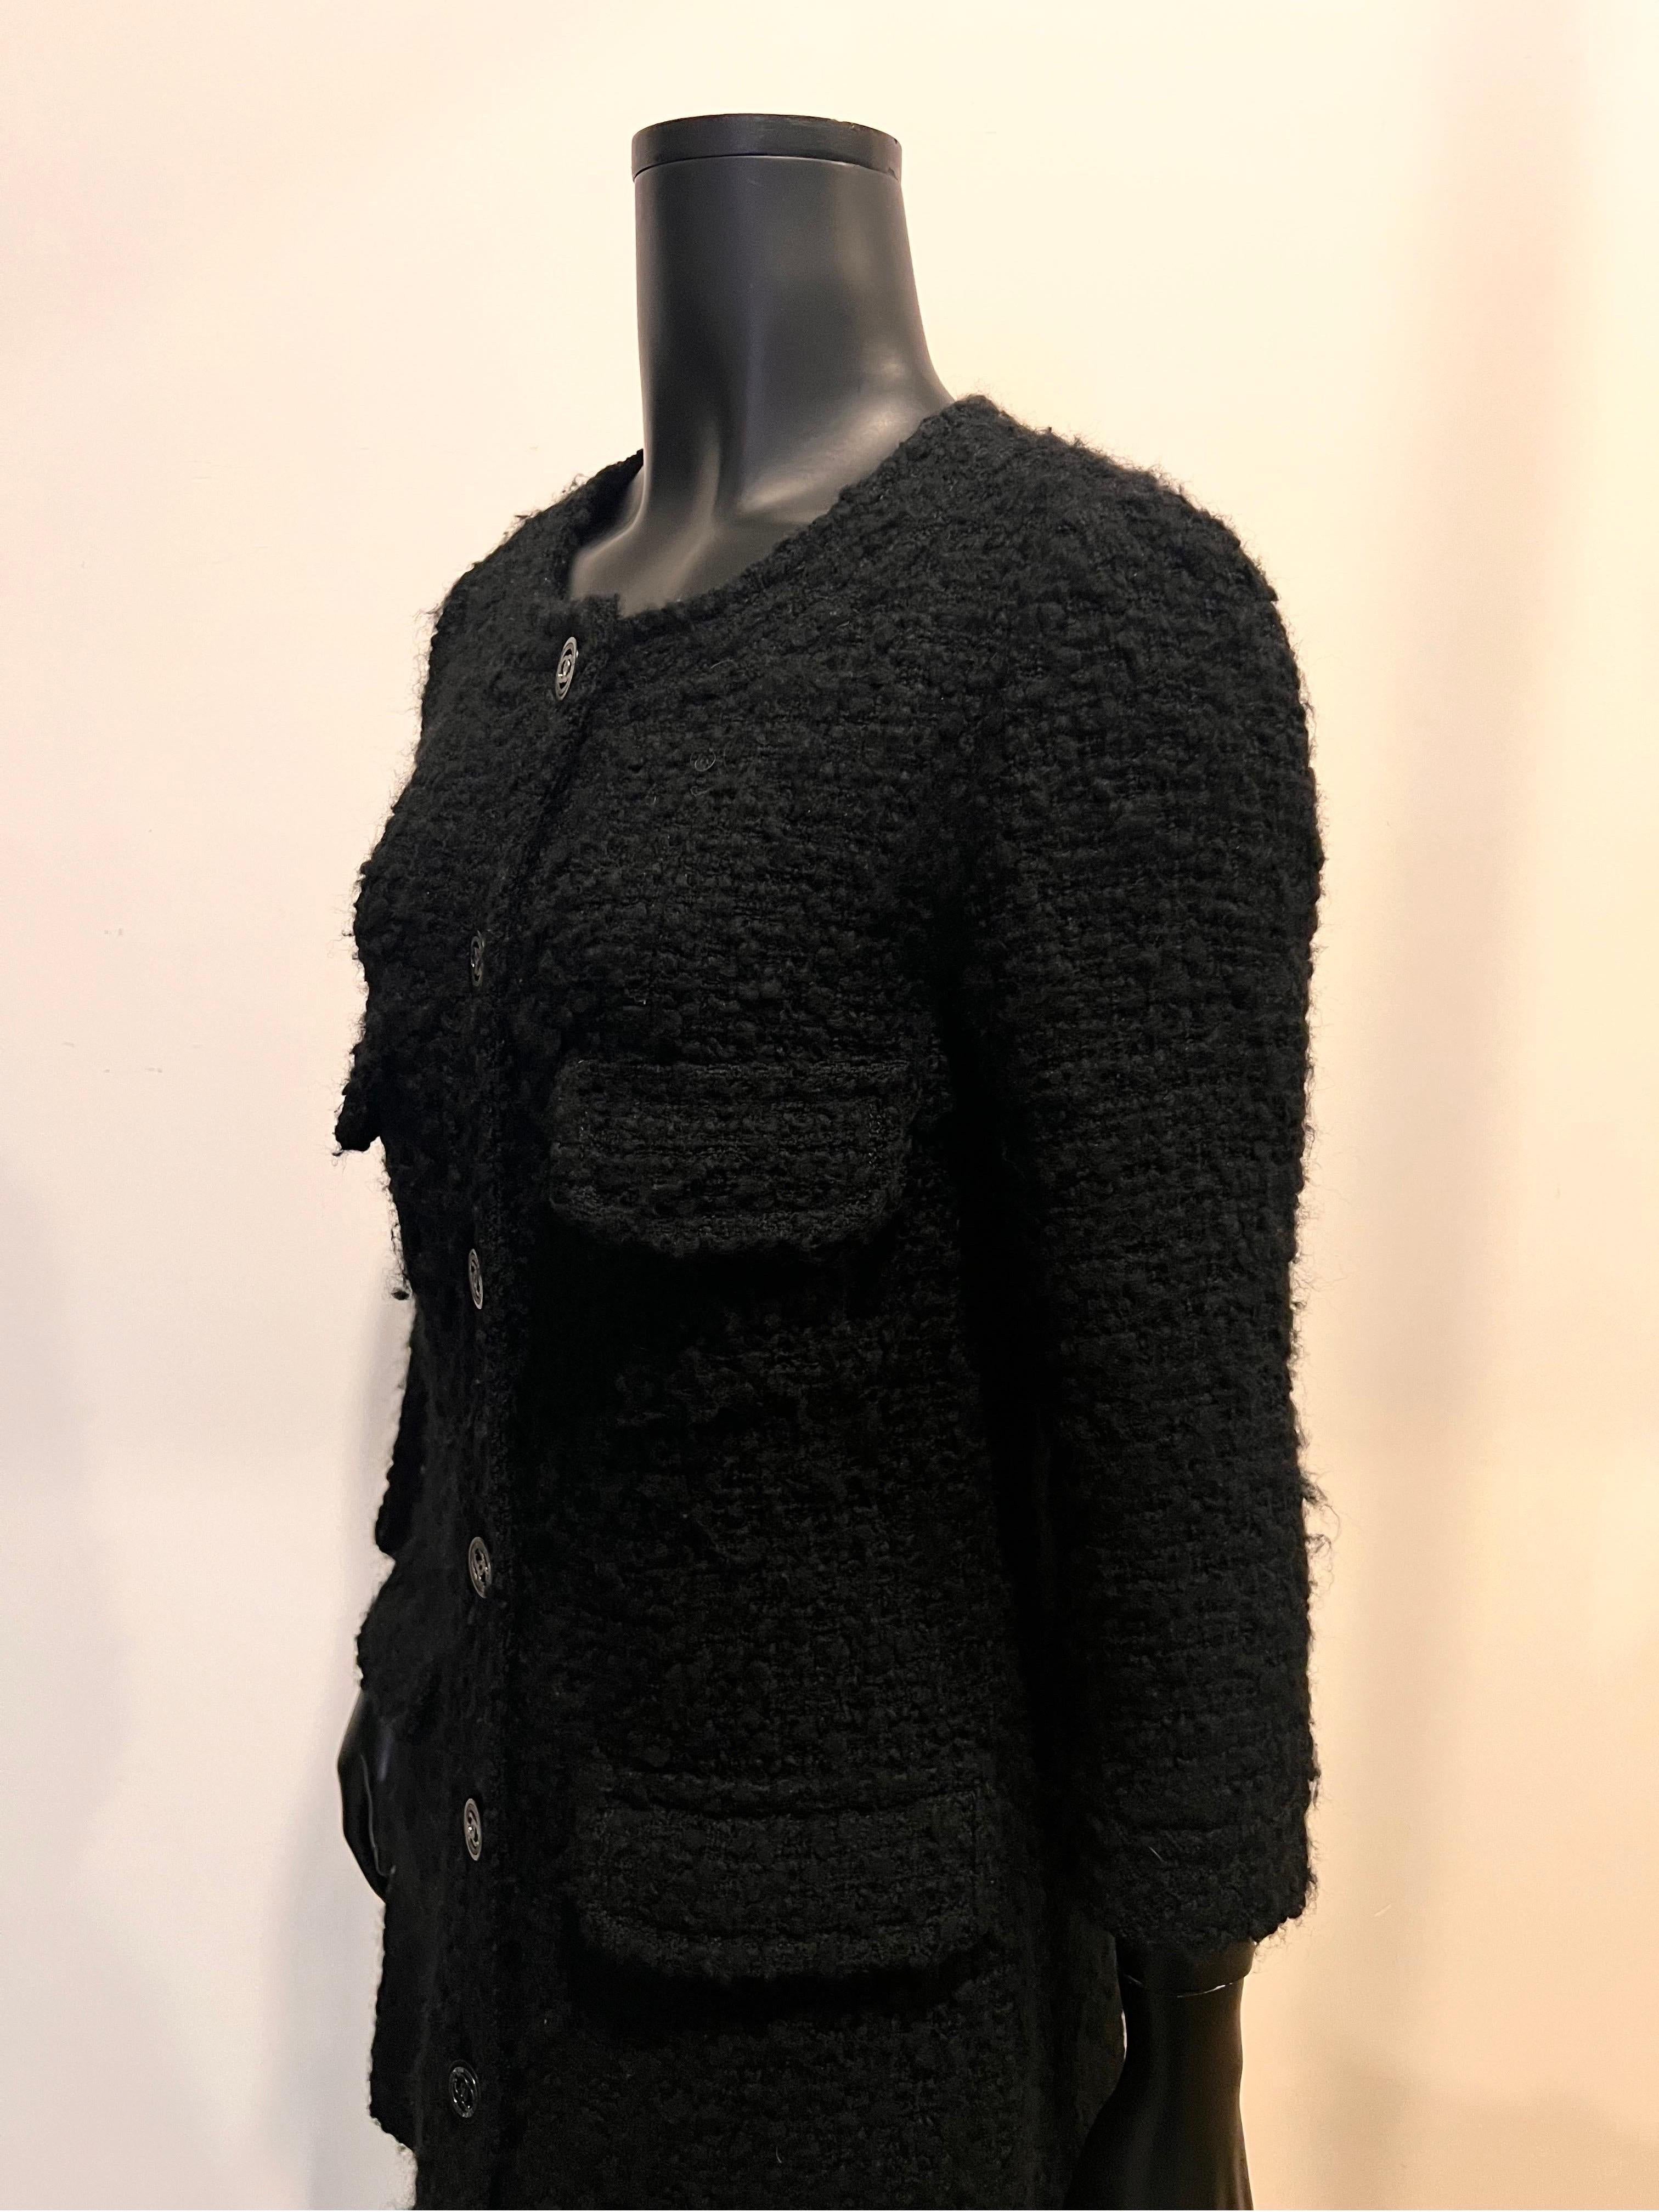 Chanel 2013 boucle tweed coat dress in black with CC details buttons  3